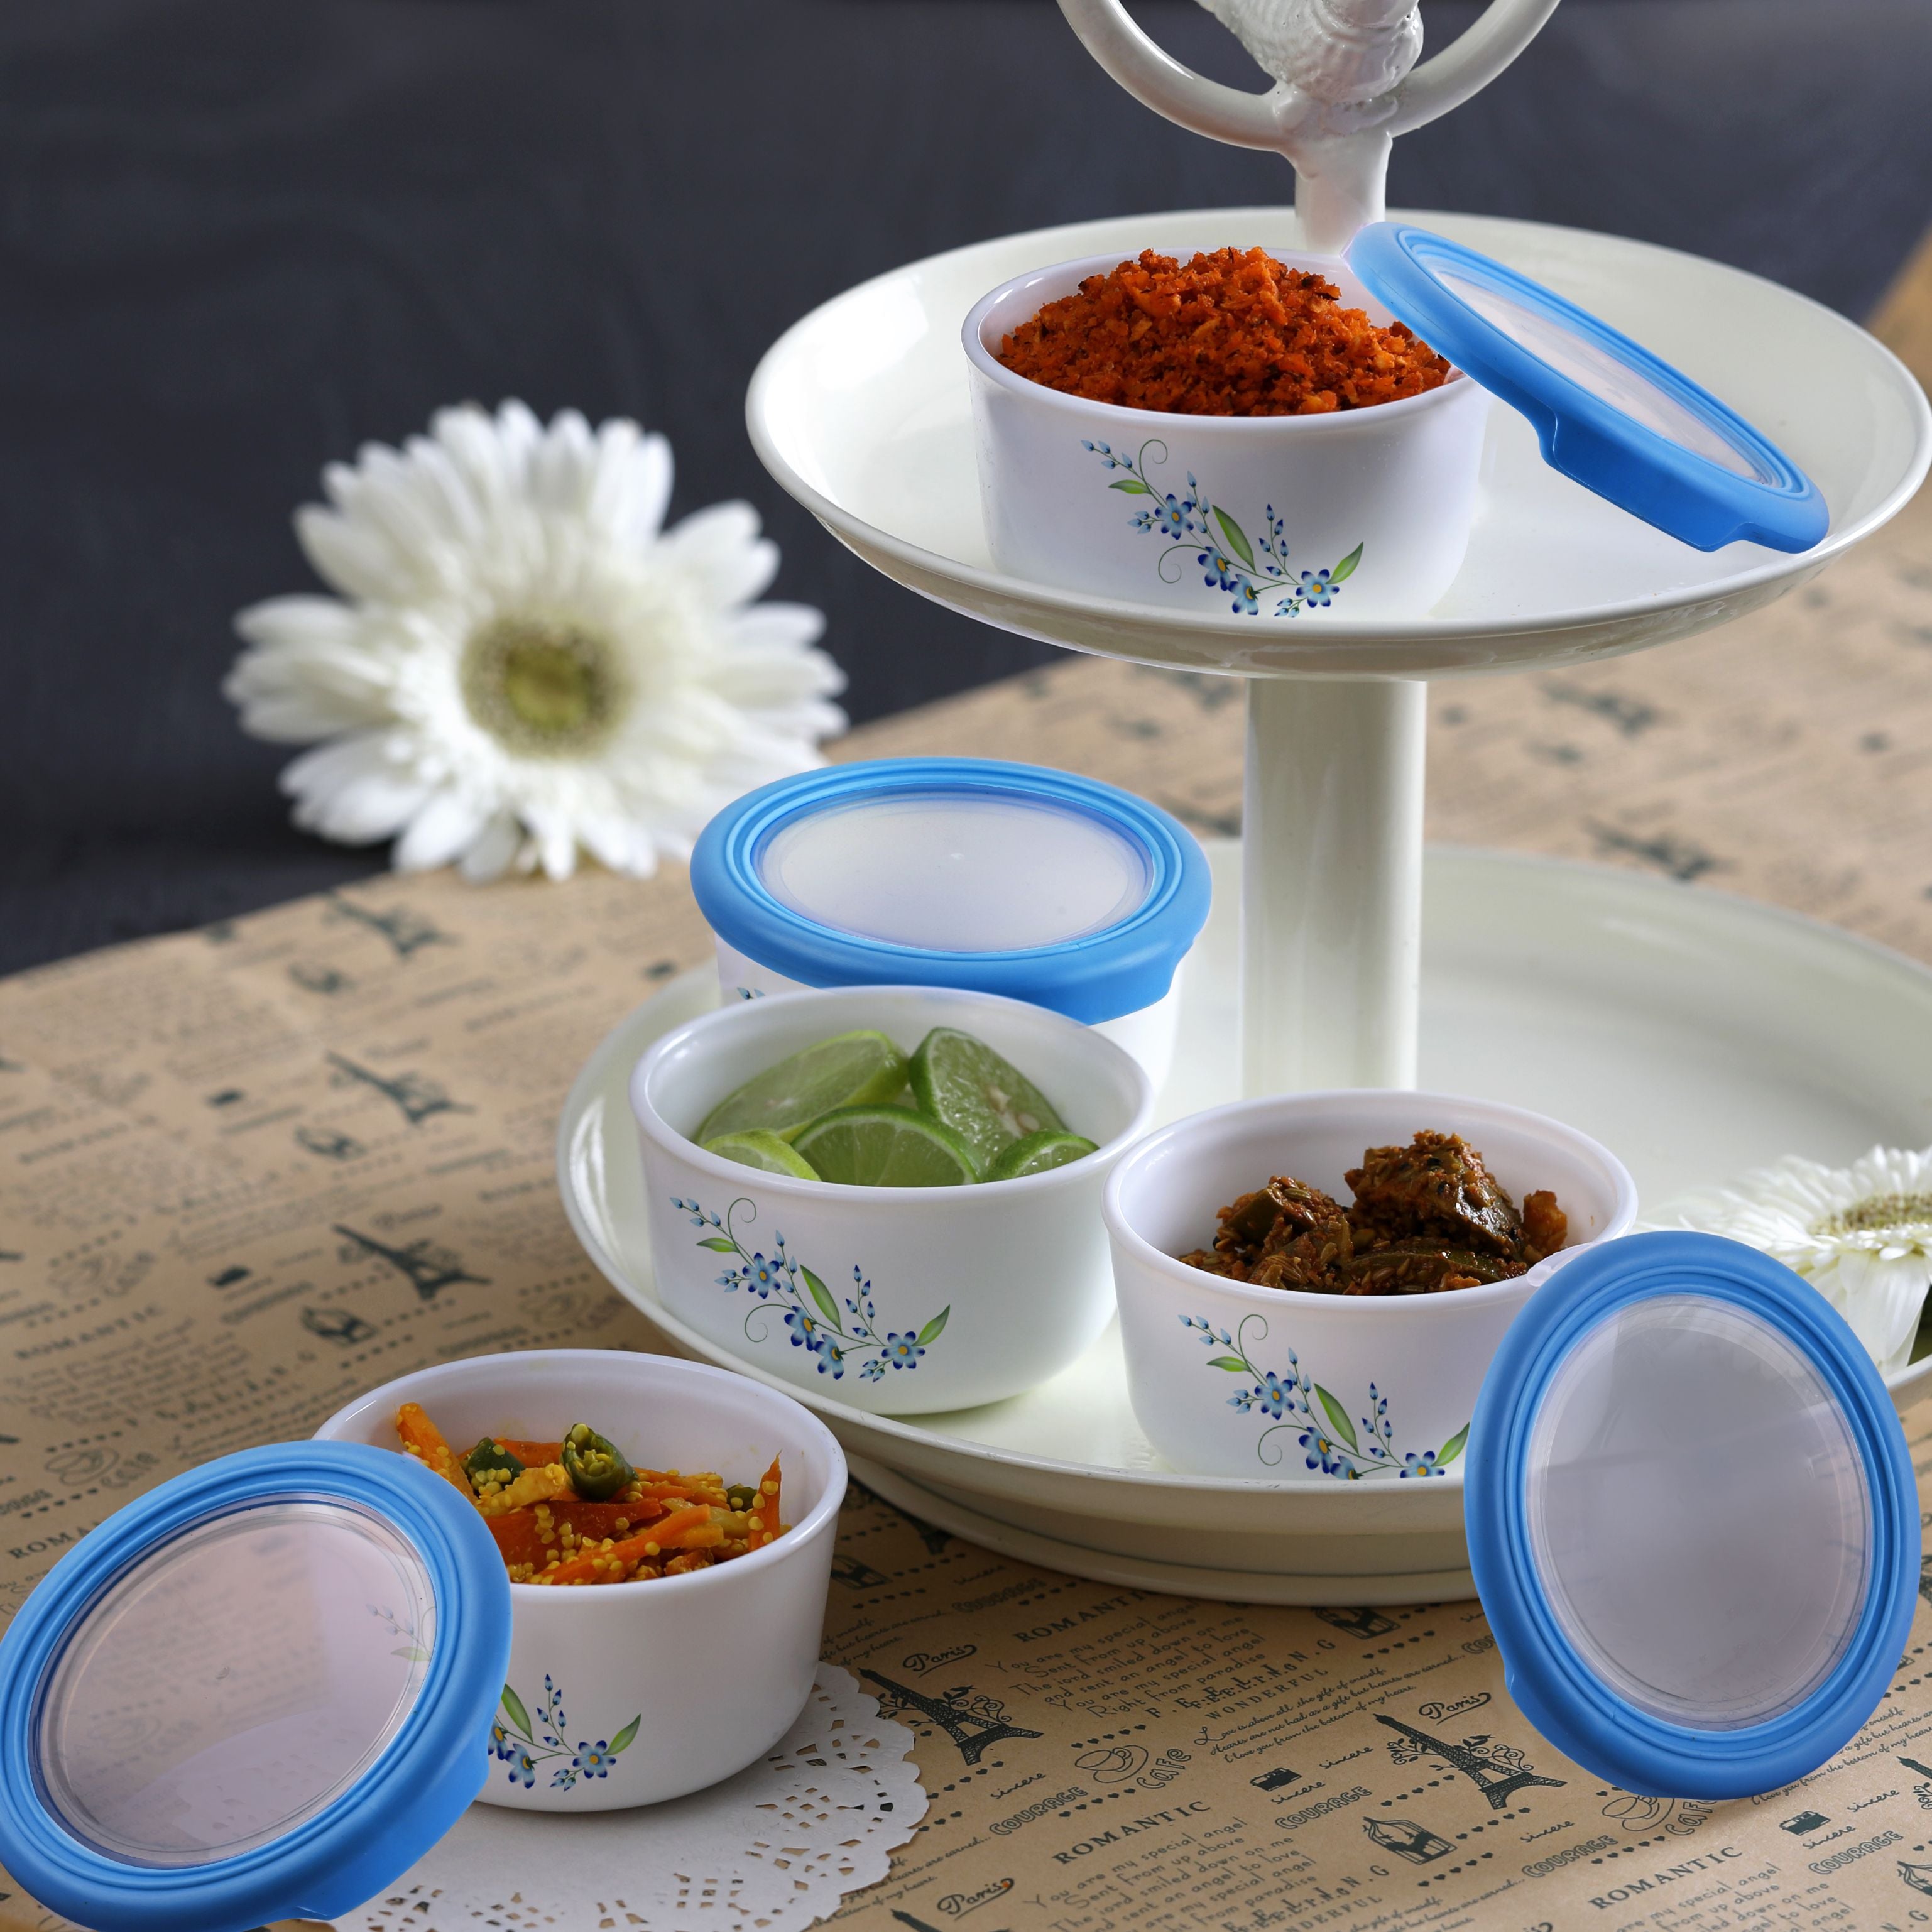 Imperial Series Condiment Gift Set with Premium lid, 6 Pieces Blue Creeper / 6 Pieces